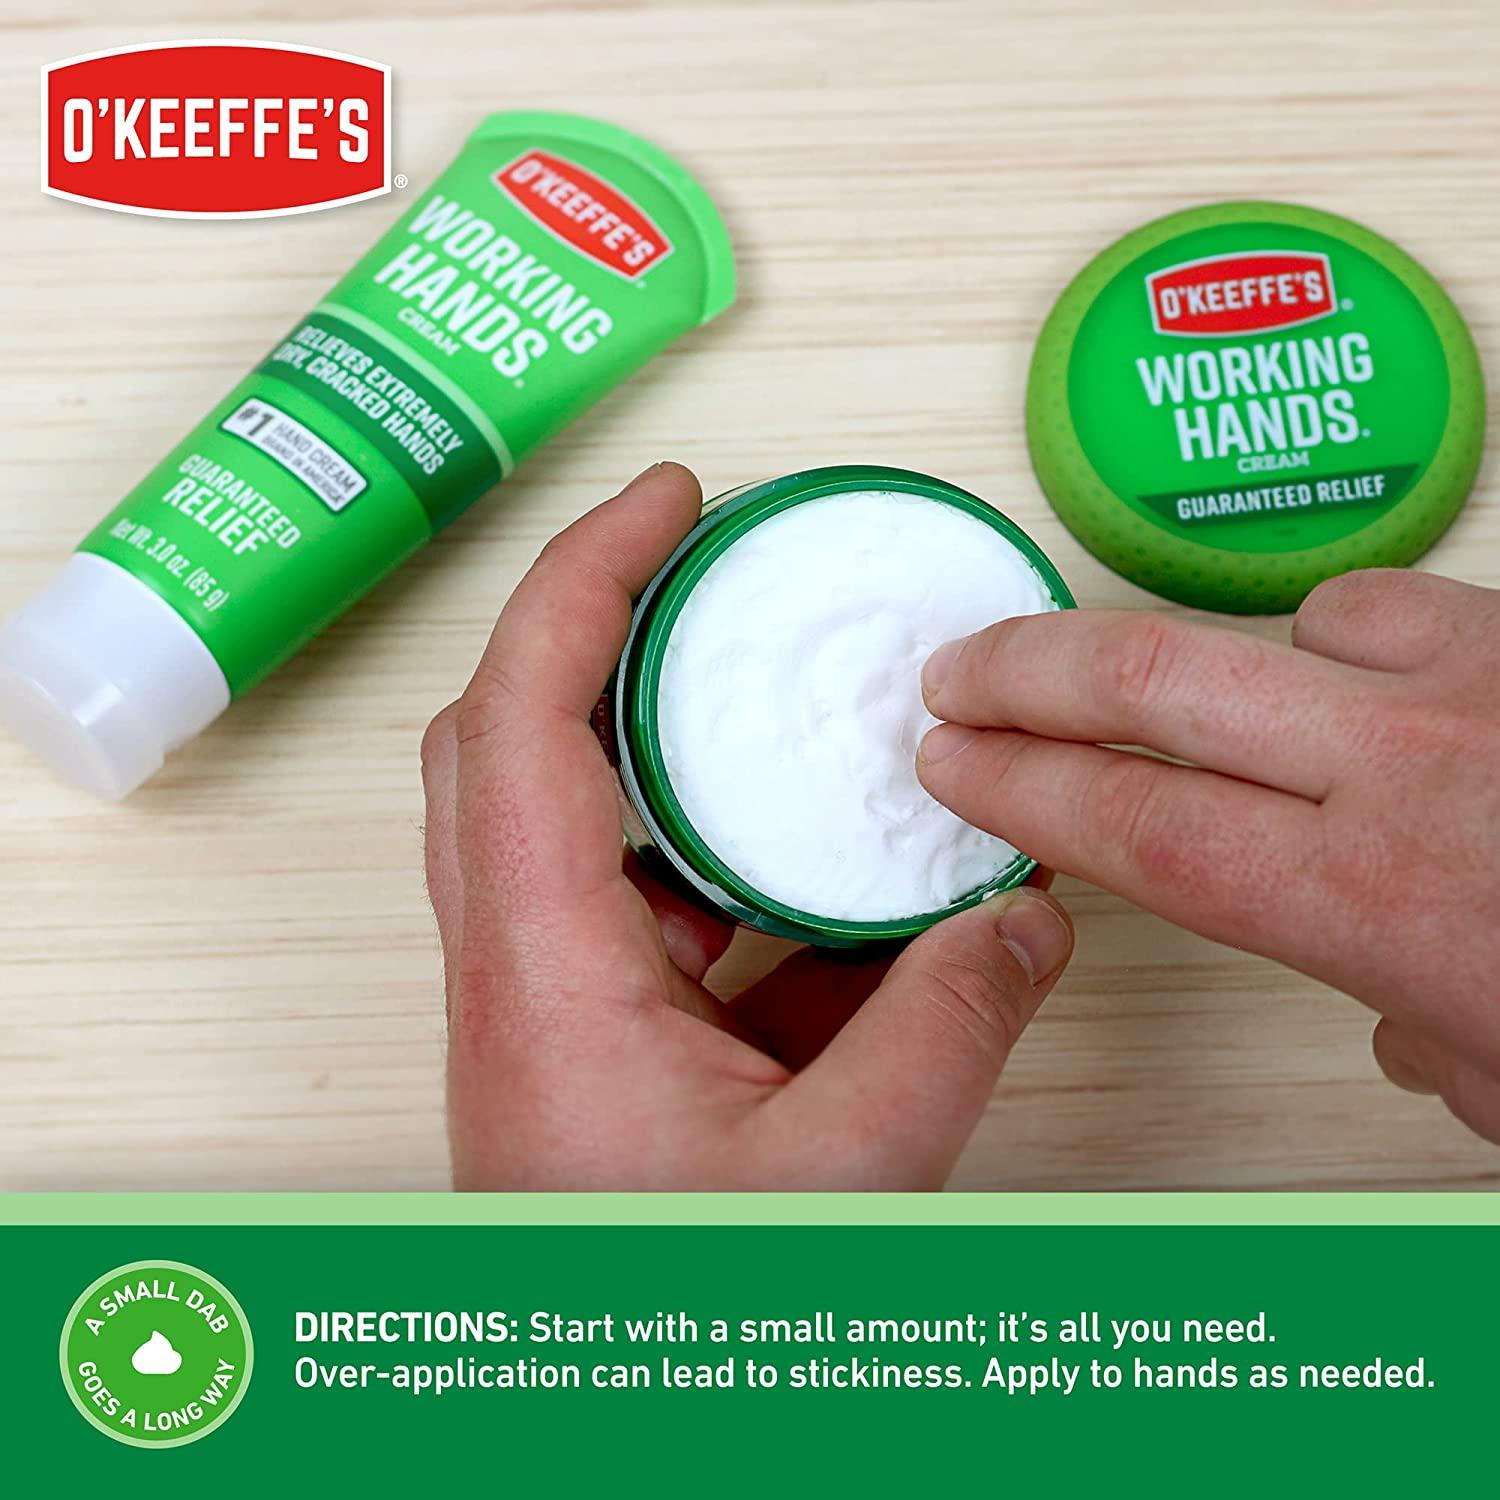 O'Keeffe's Working Hands Hand Cream for Extremely Dry, Cracked Hands, 3.4  Ounce Jar, (Pack 1)